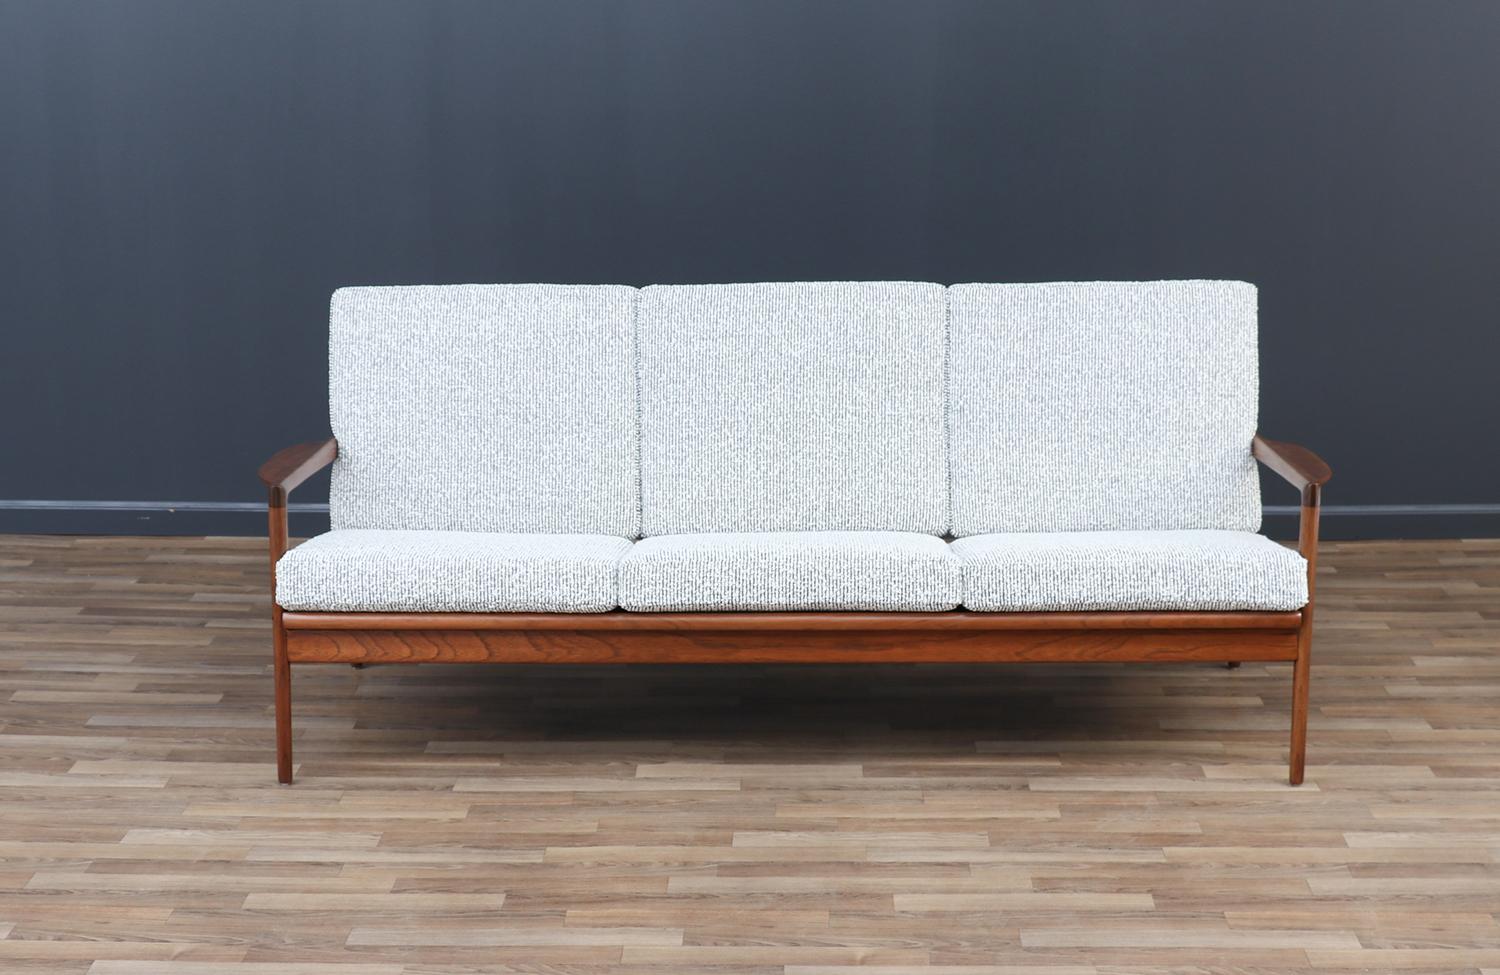 Expertly Restored - Ib Kofod-Larsen Sculpted Exoskeleton Walnut Sofa for Selig In Excellent Condition For Sale In Los Angeles, CA